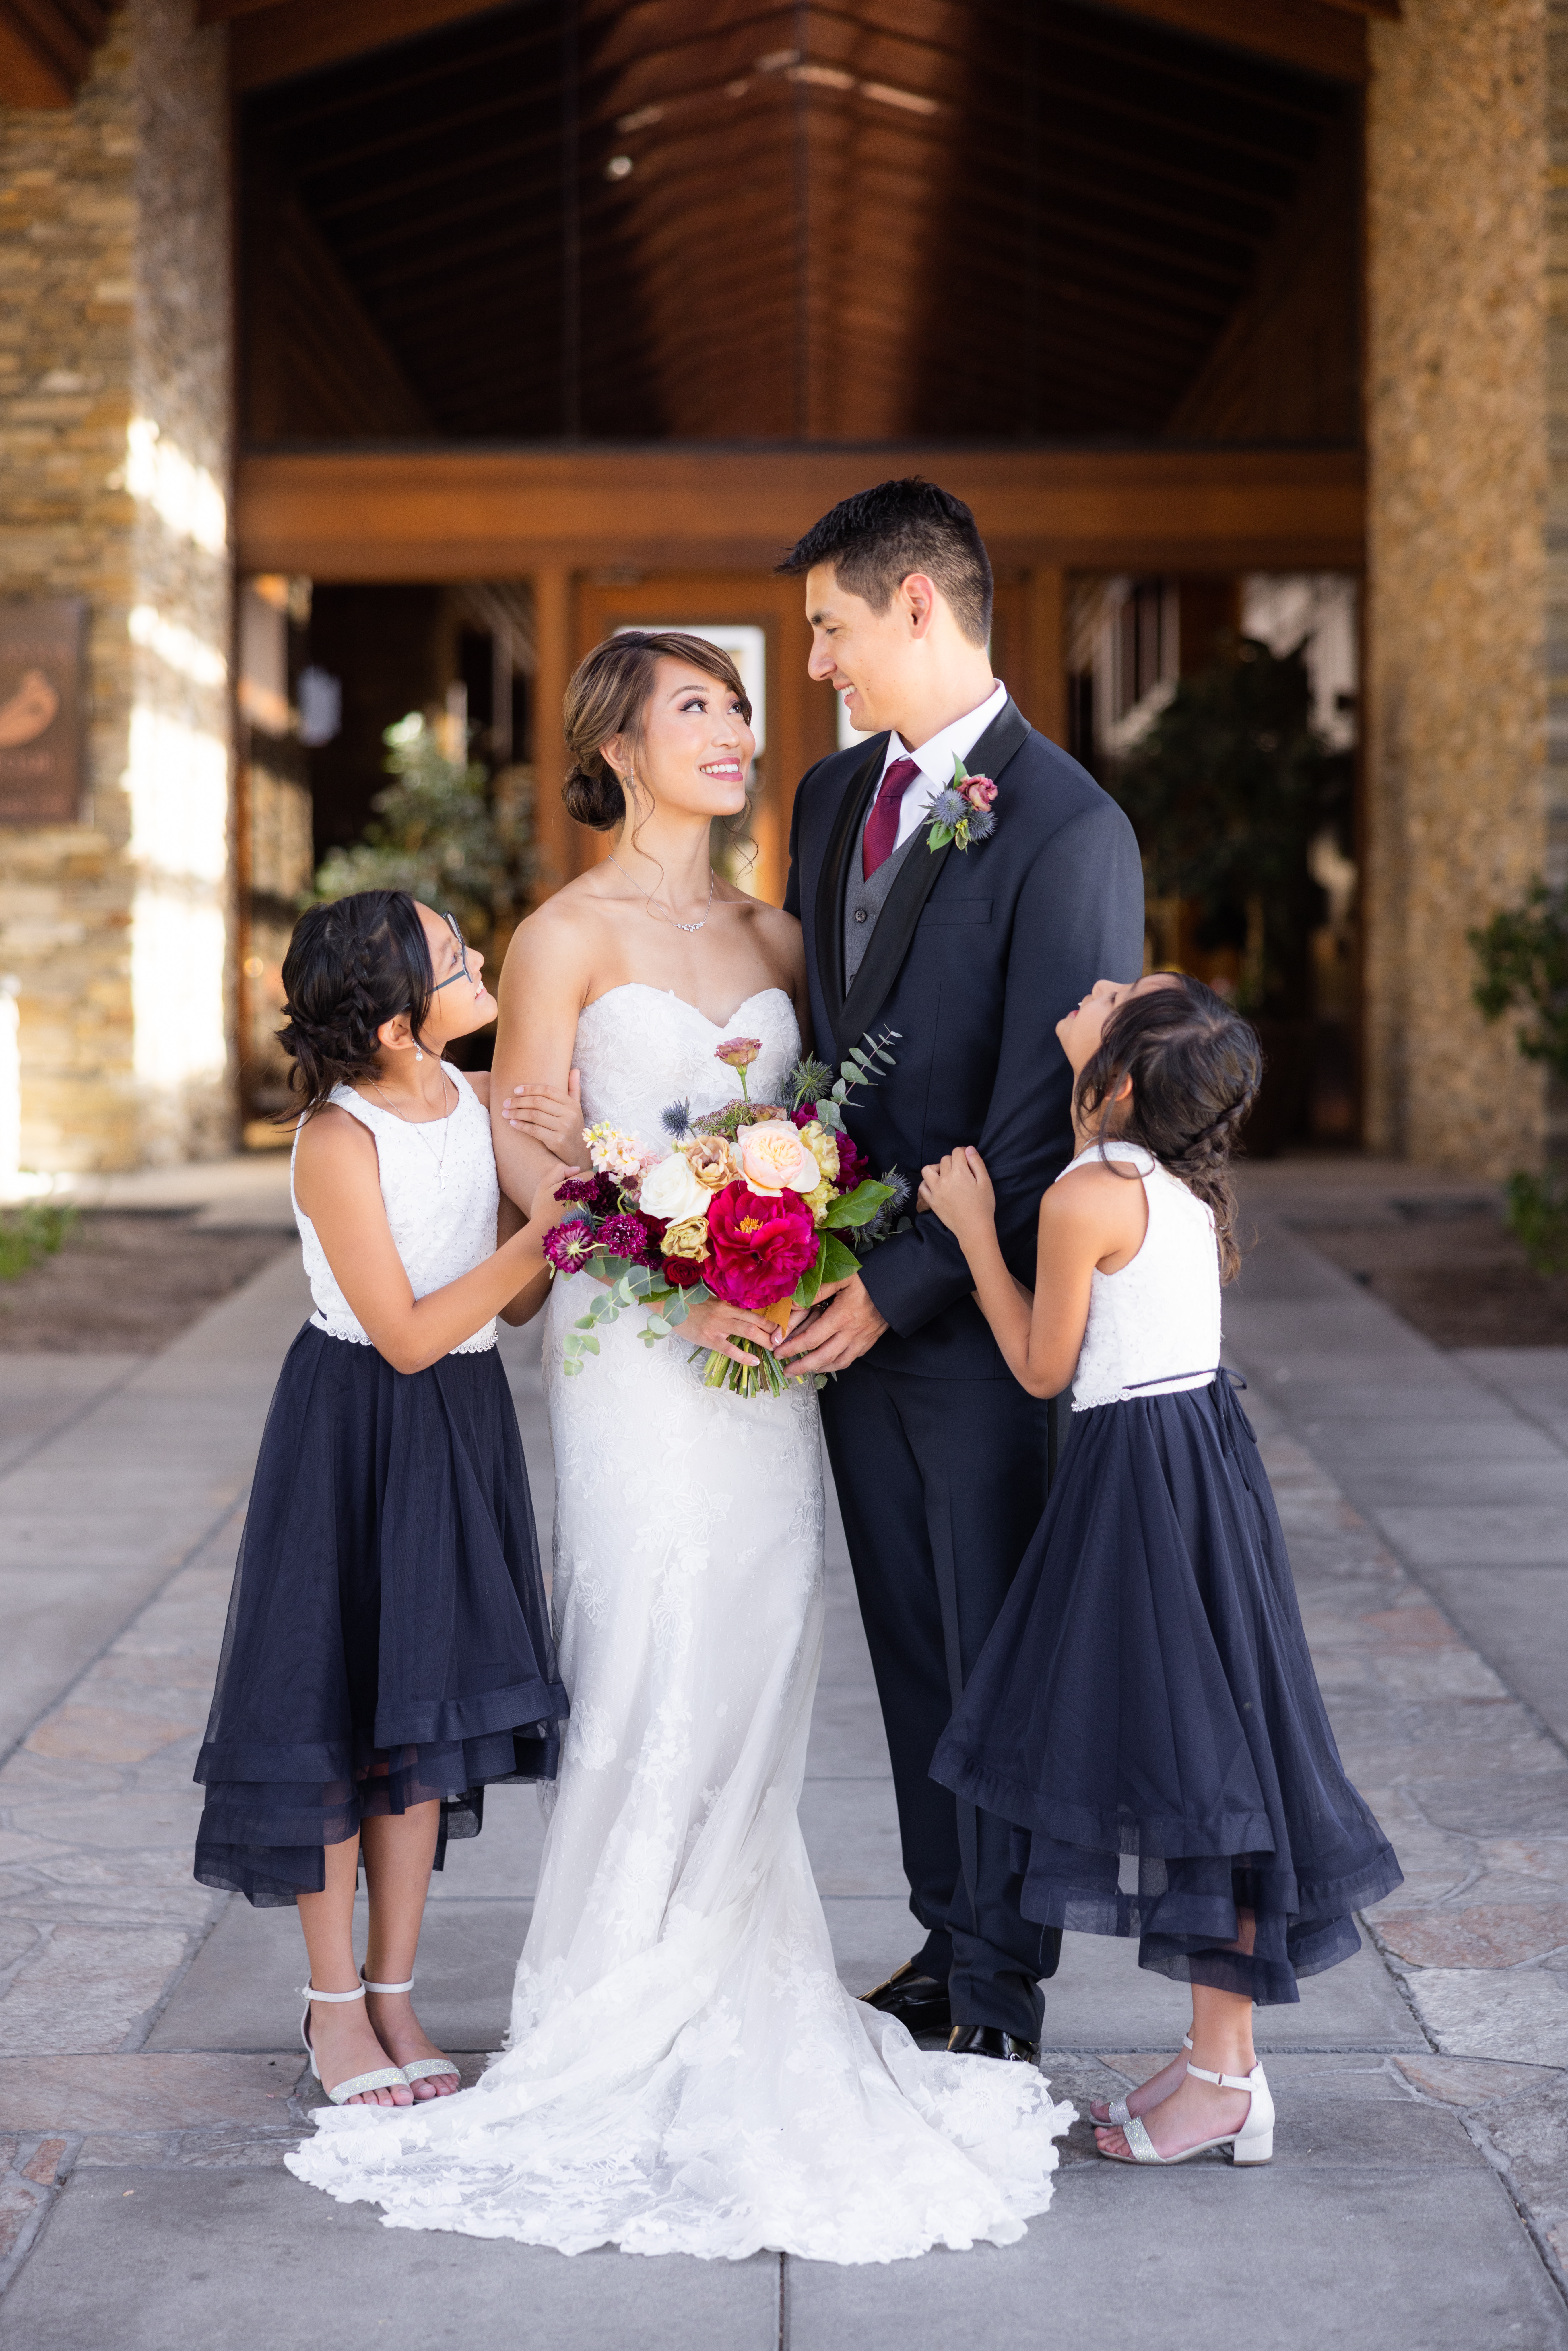 bride in strapless lace wedding dress and groom in navy tuxedo stand with flower girls in coordinating navy and white dresses